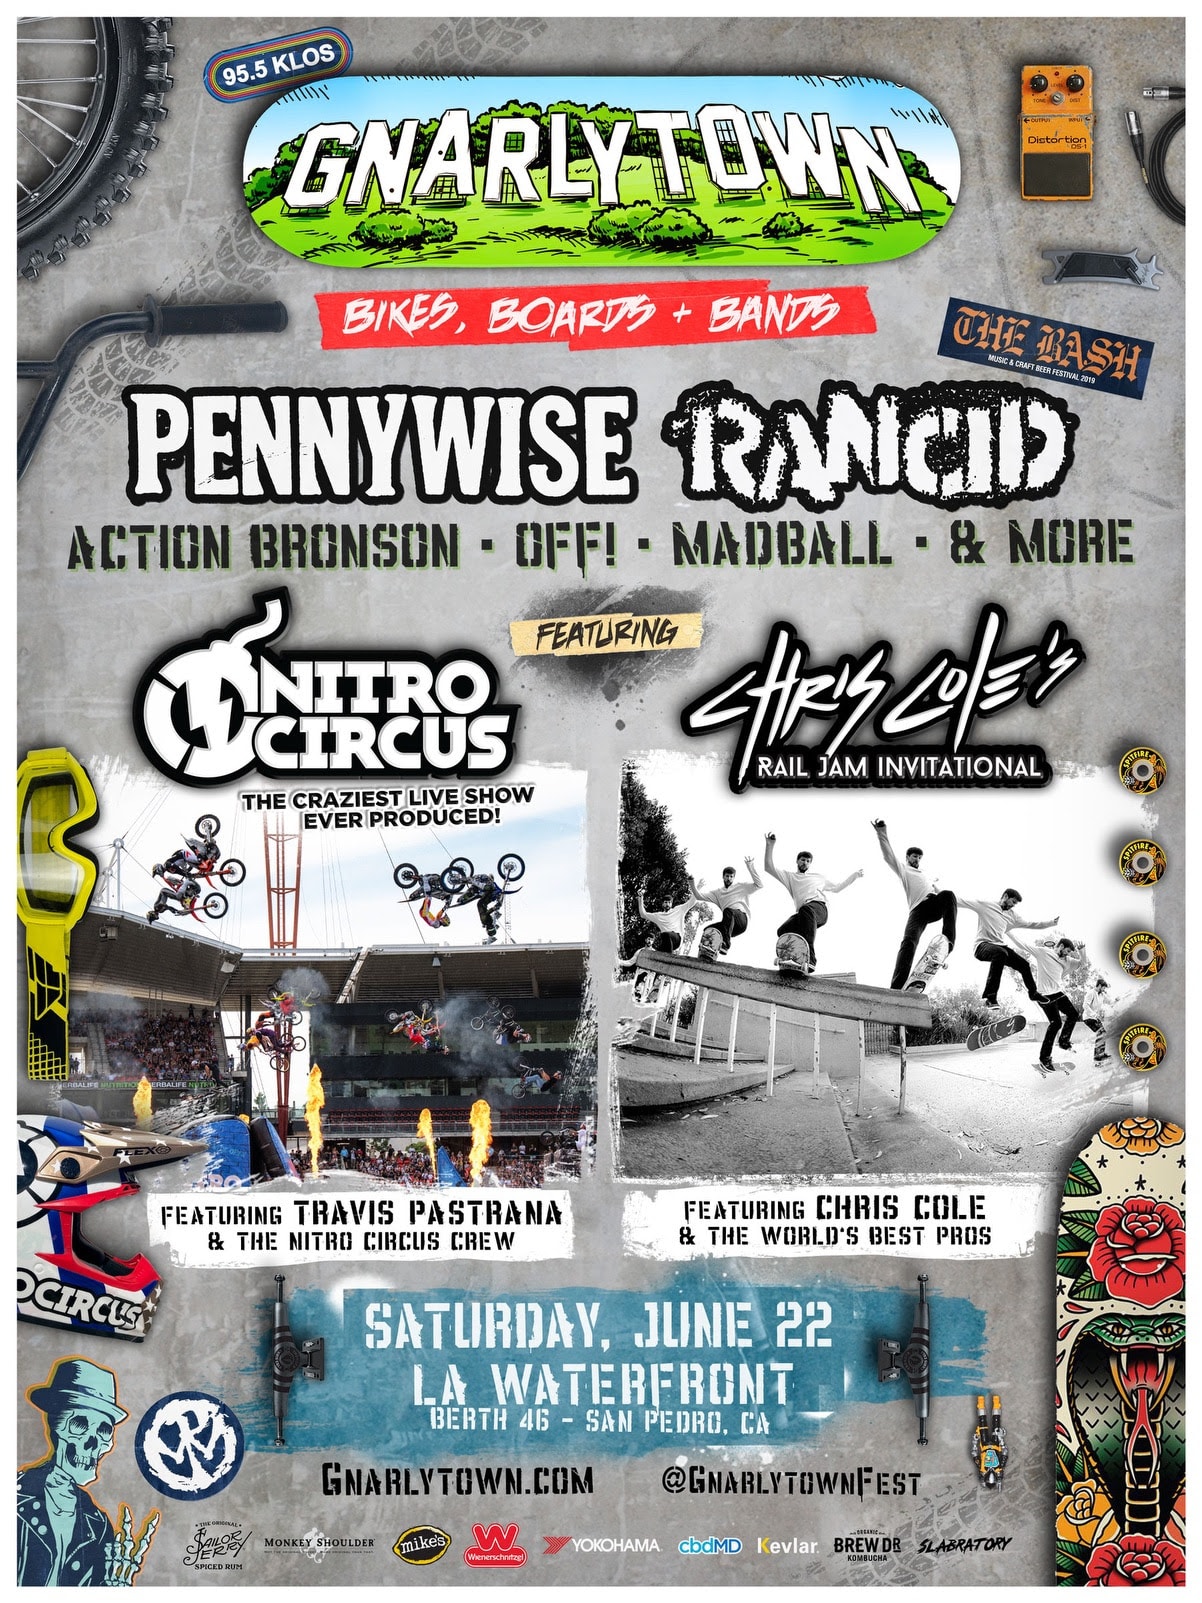 CHRIS COLE'S 'RAIL JAM INVITATIONAL' SCHEDULED FOR JUNE AT GNARLYTOWN FEST